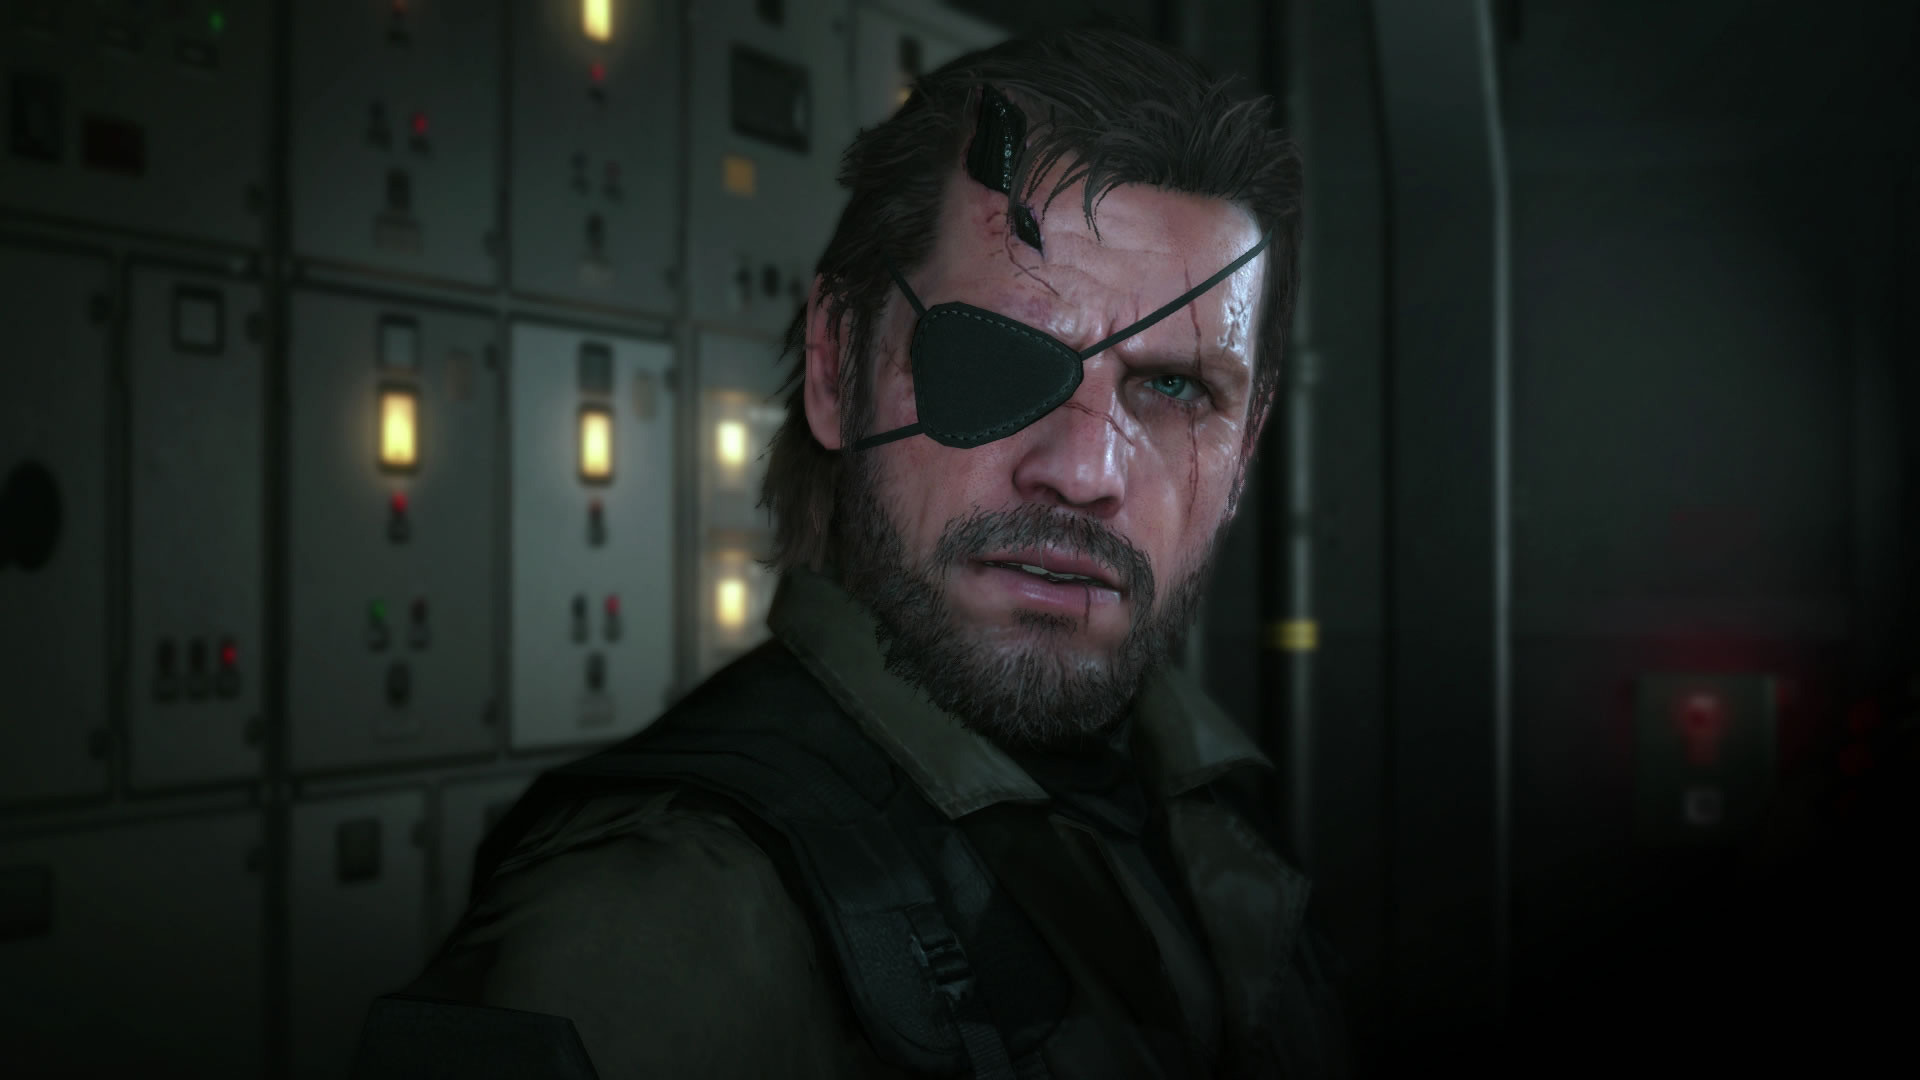 Feast your eyes on a ton of beautiful new MGSVTPP screenshots